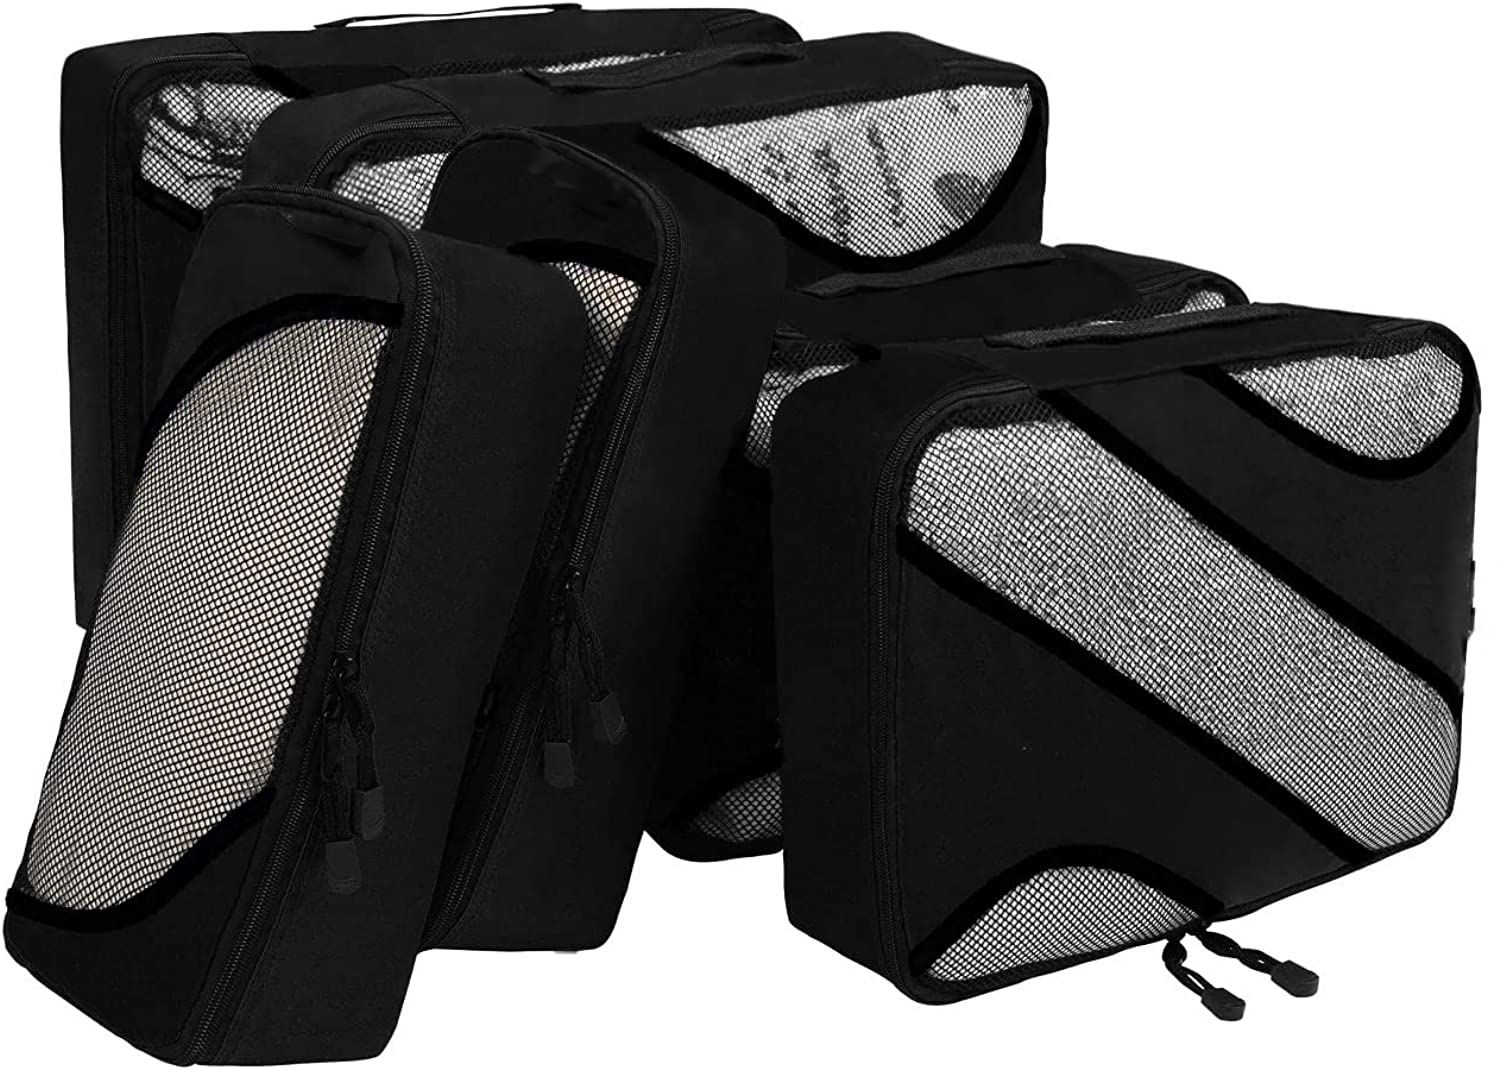 Packing Cubes Travel Cube Lightweight Travel Essential Bag With Large Toiletries Bag For Clothes Stocking Skirt T Shirt